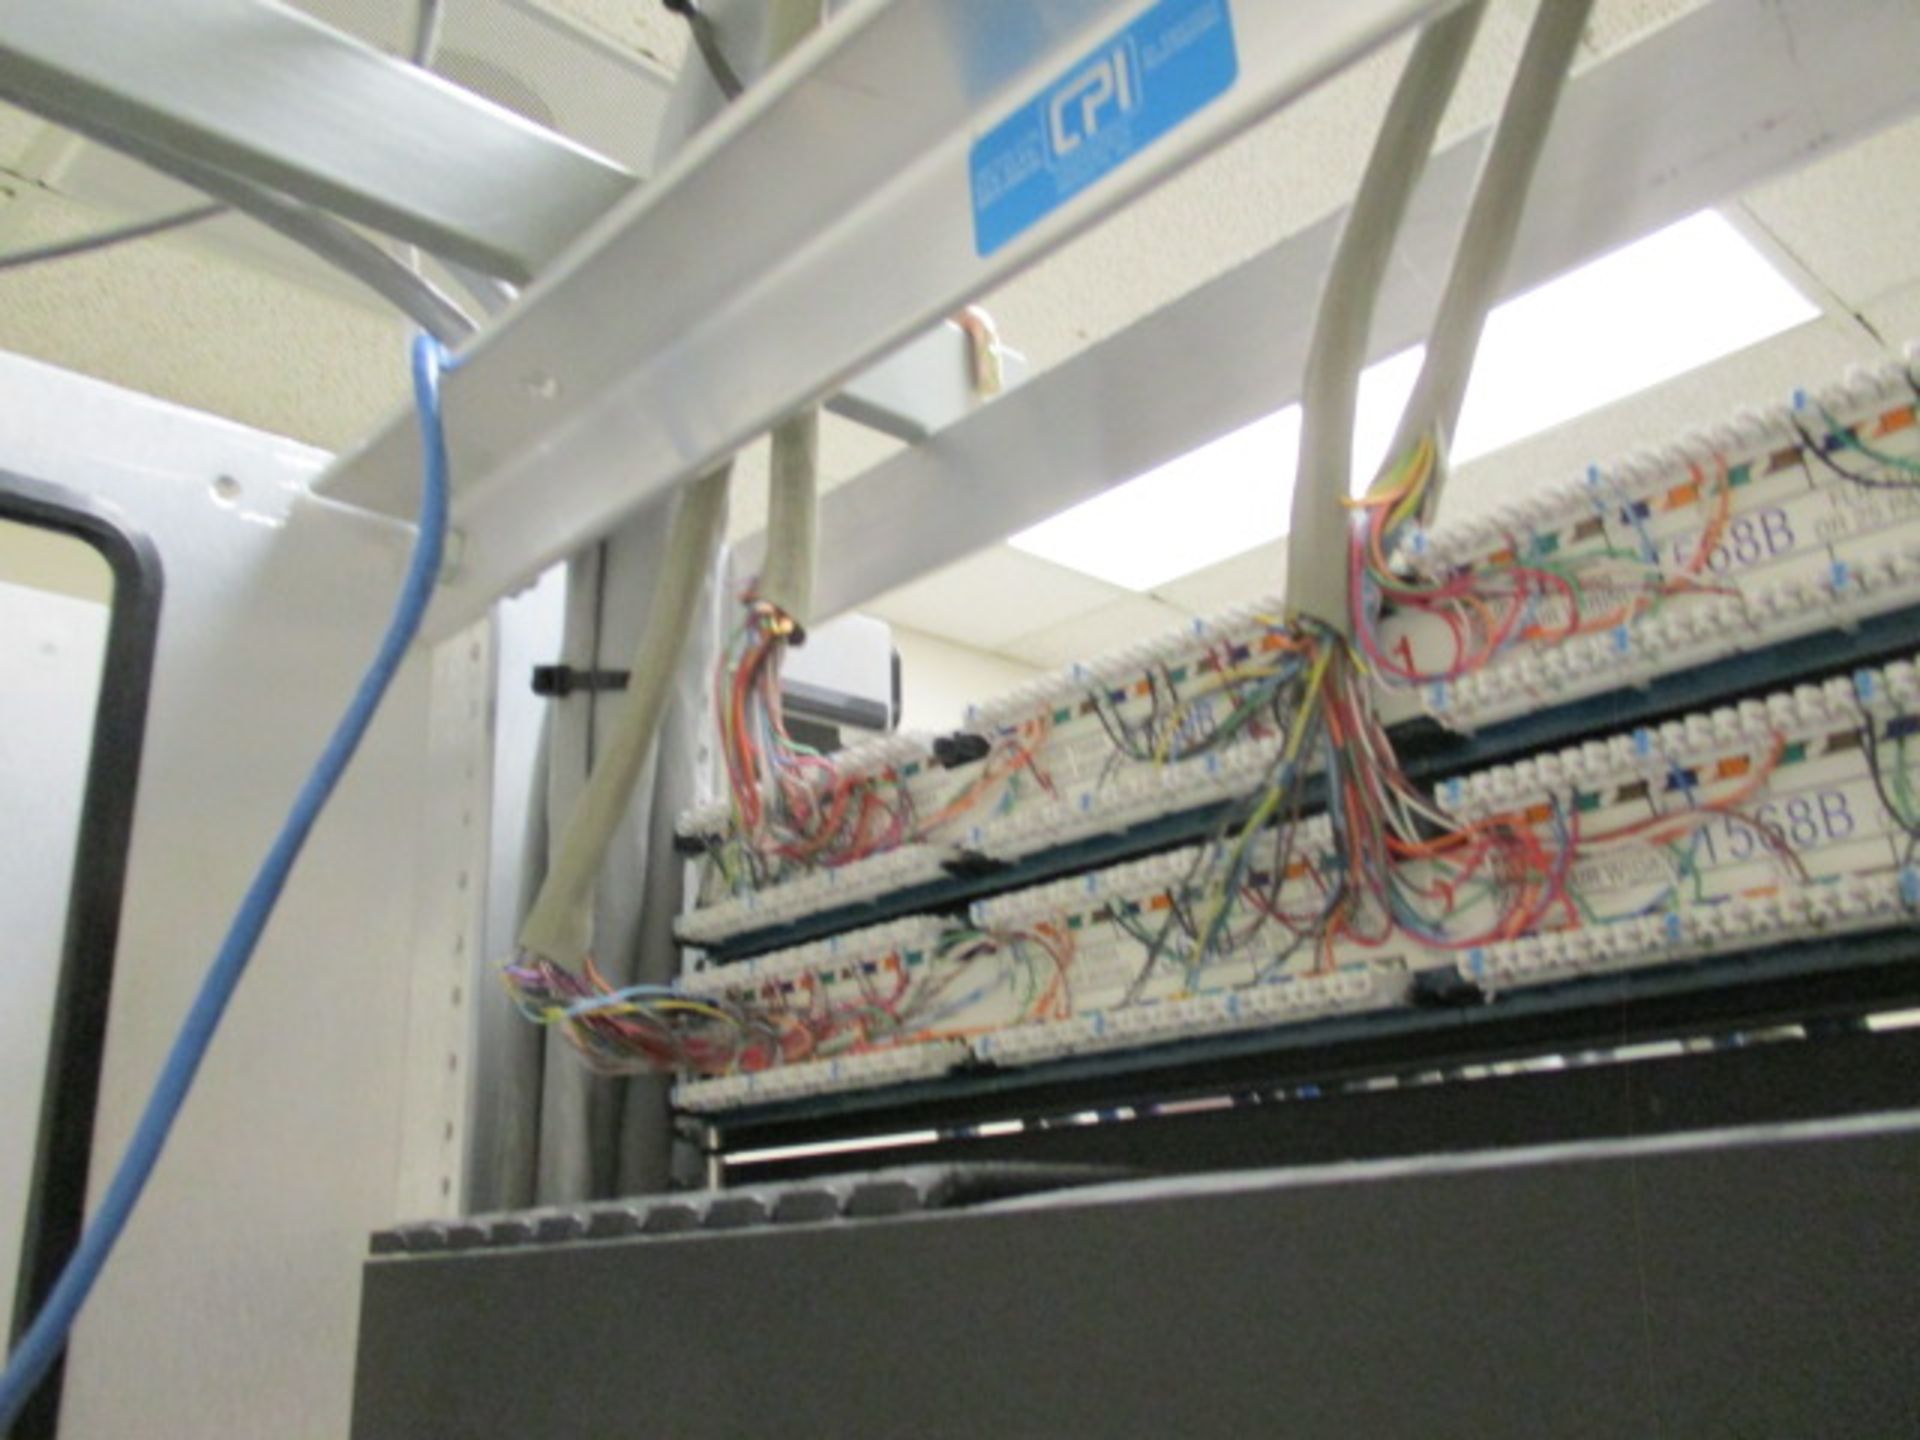 Lot: Qty-3 Instruments Racks 84"H, With 13-Total Cat5e/Cat5 Patch Panels [Total Panels: 5@64-Port - Image 3 of 3